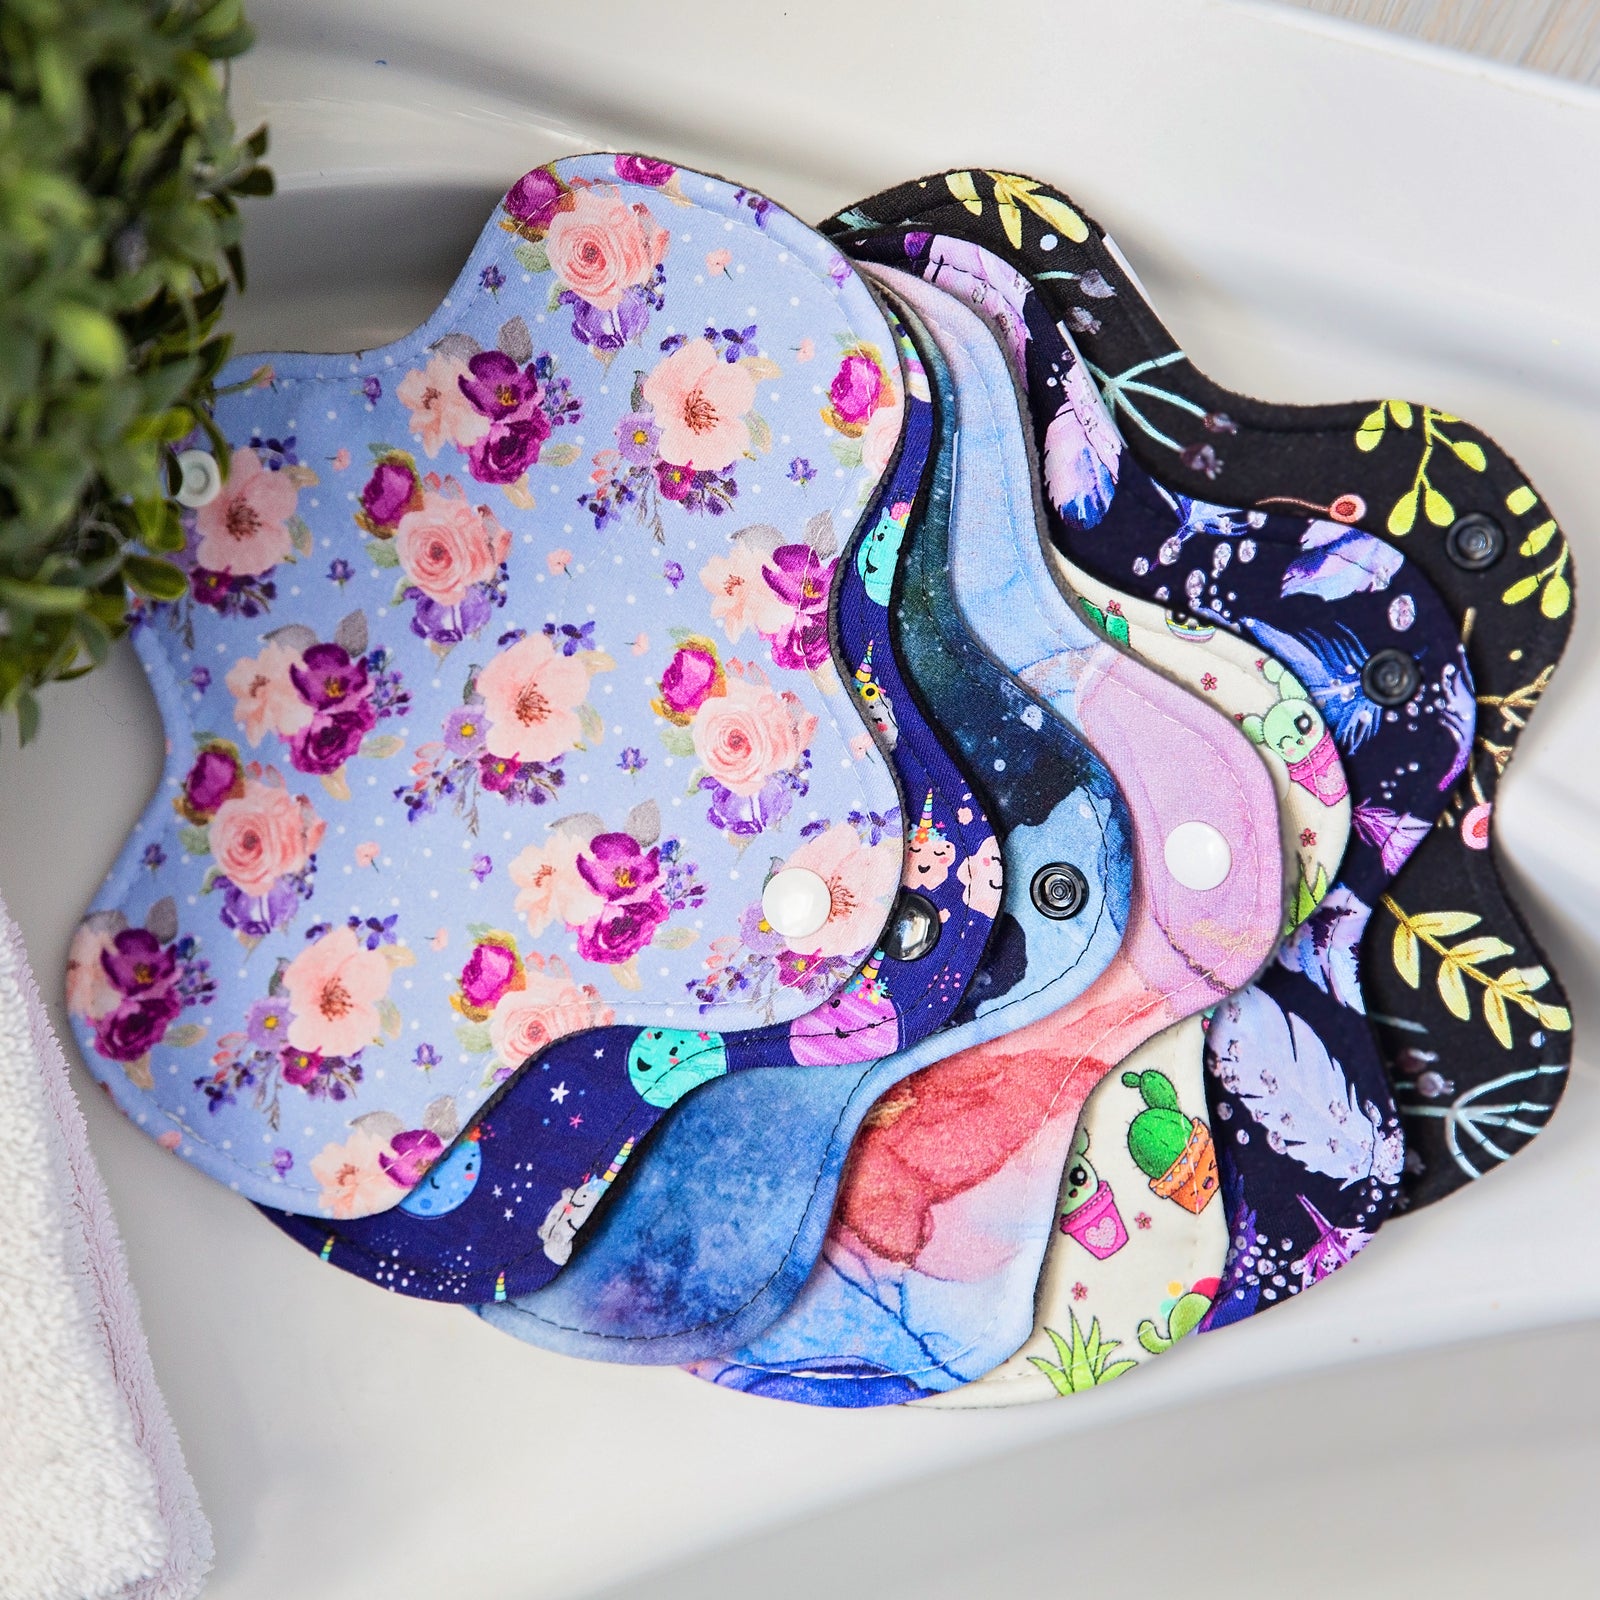 Using Reusable Pads for Bladder Incontinence - Amie Pads